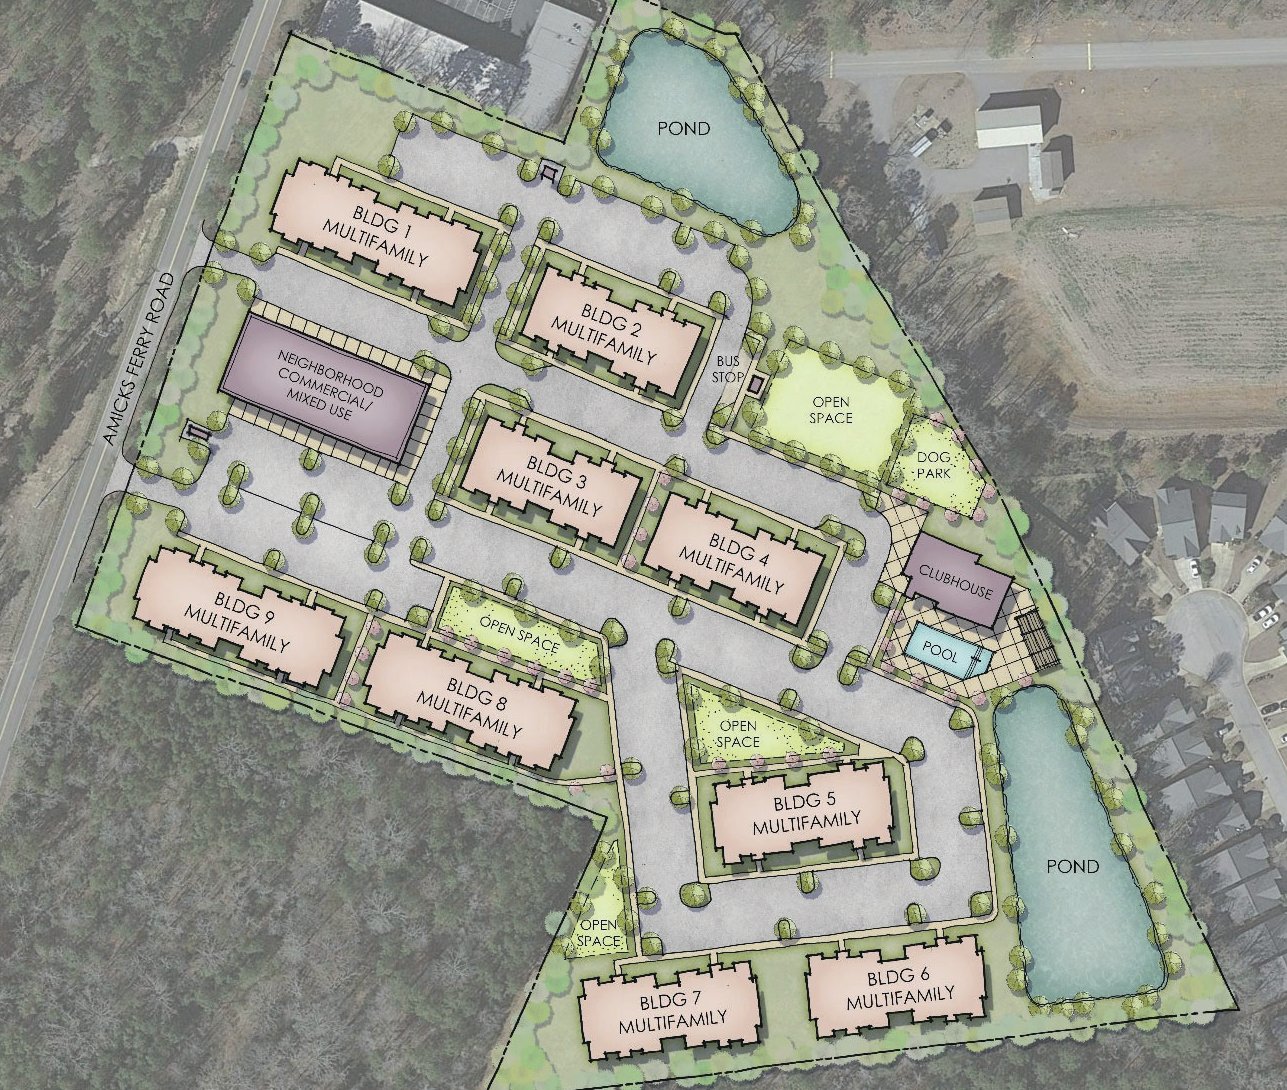 Rendering of proposed apartment complex along Amicks Ferry Road in Chapin.